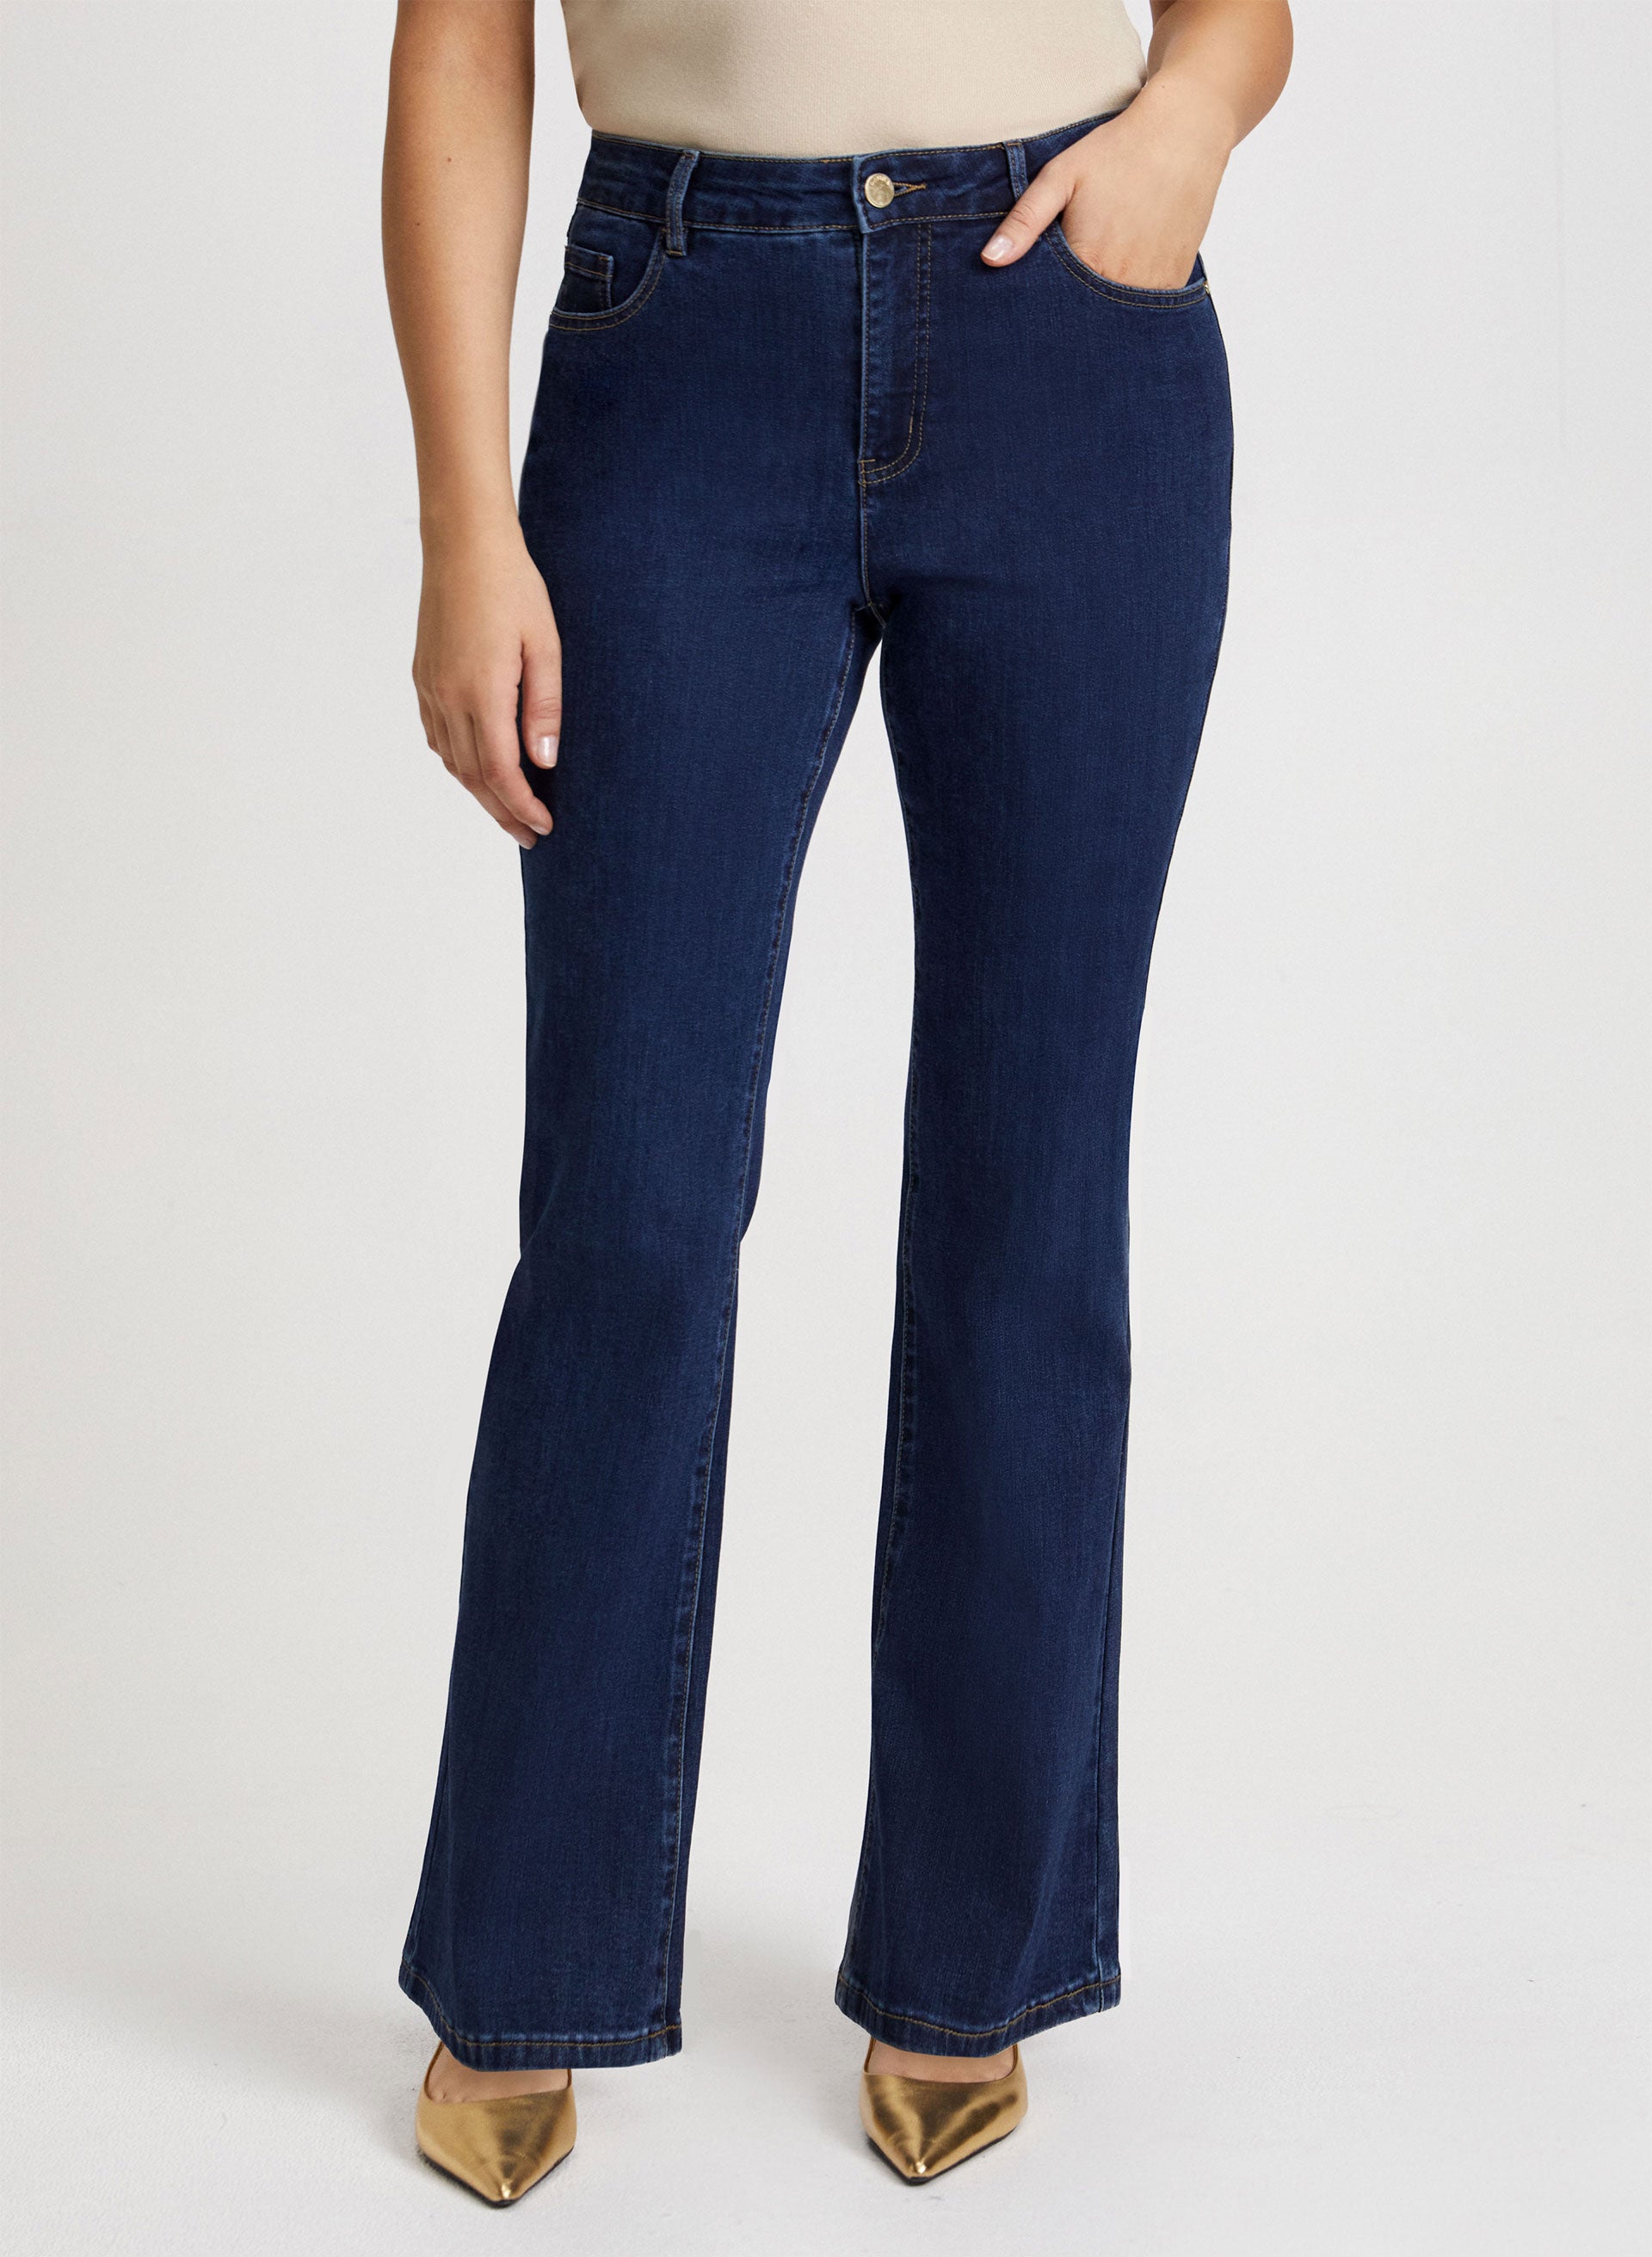 HIGH WAISTED JEANS HAUL & REVIEW  Bootcut, Belle Bottoms, Flared